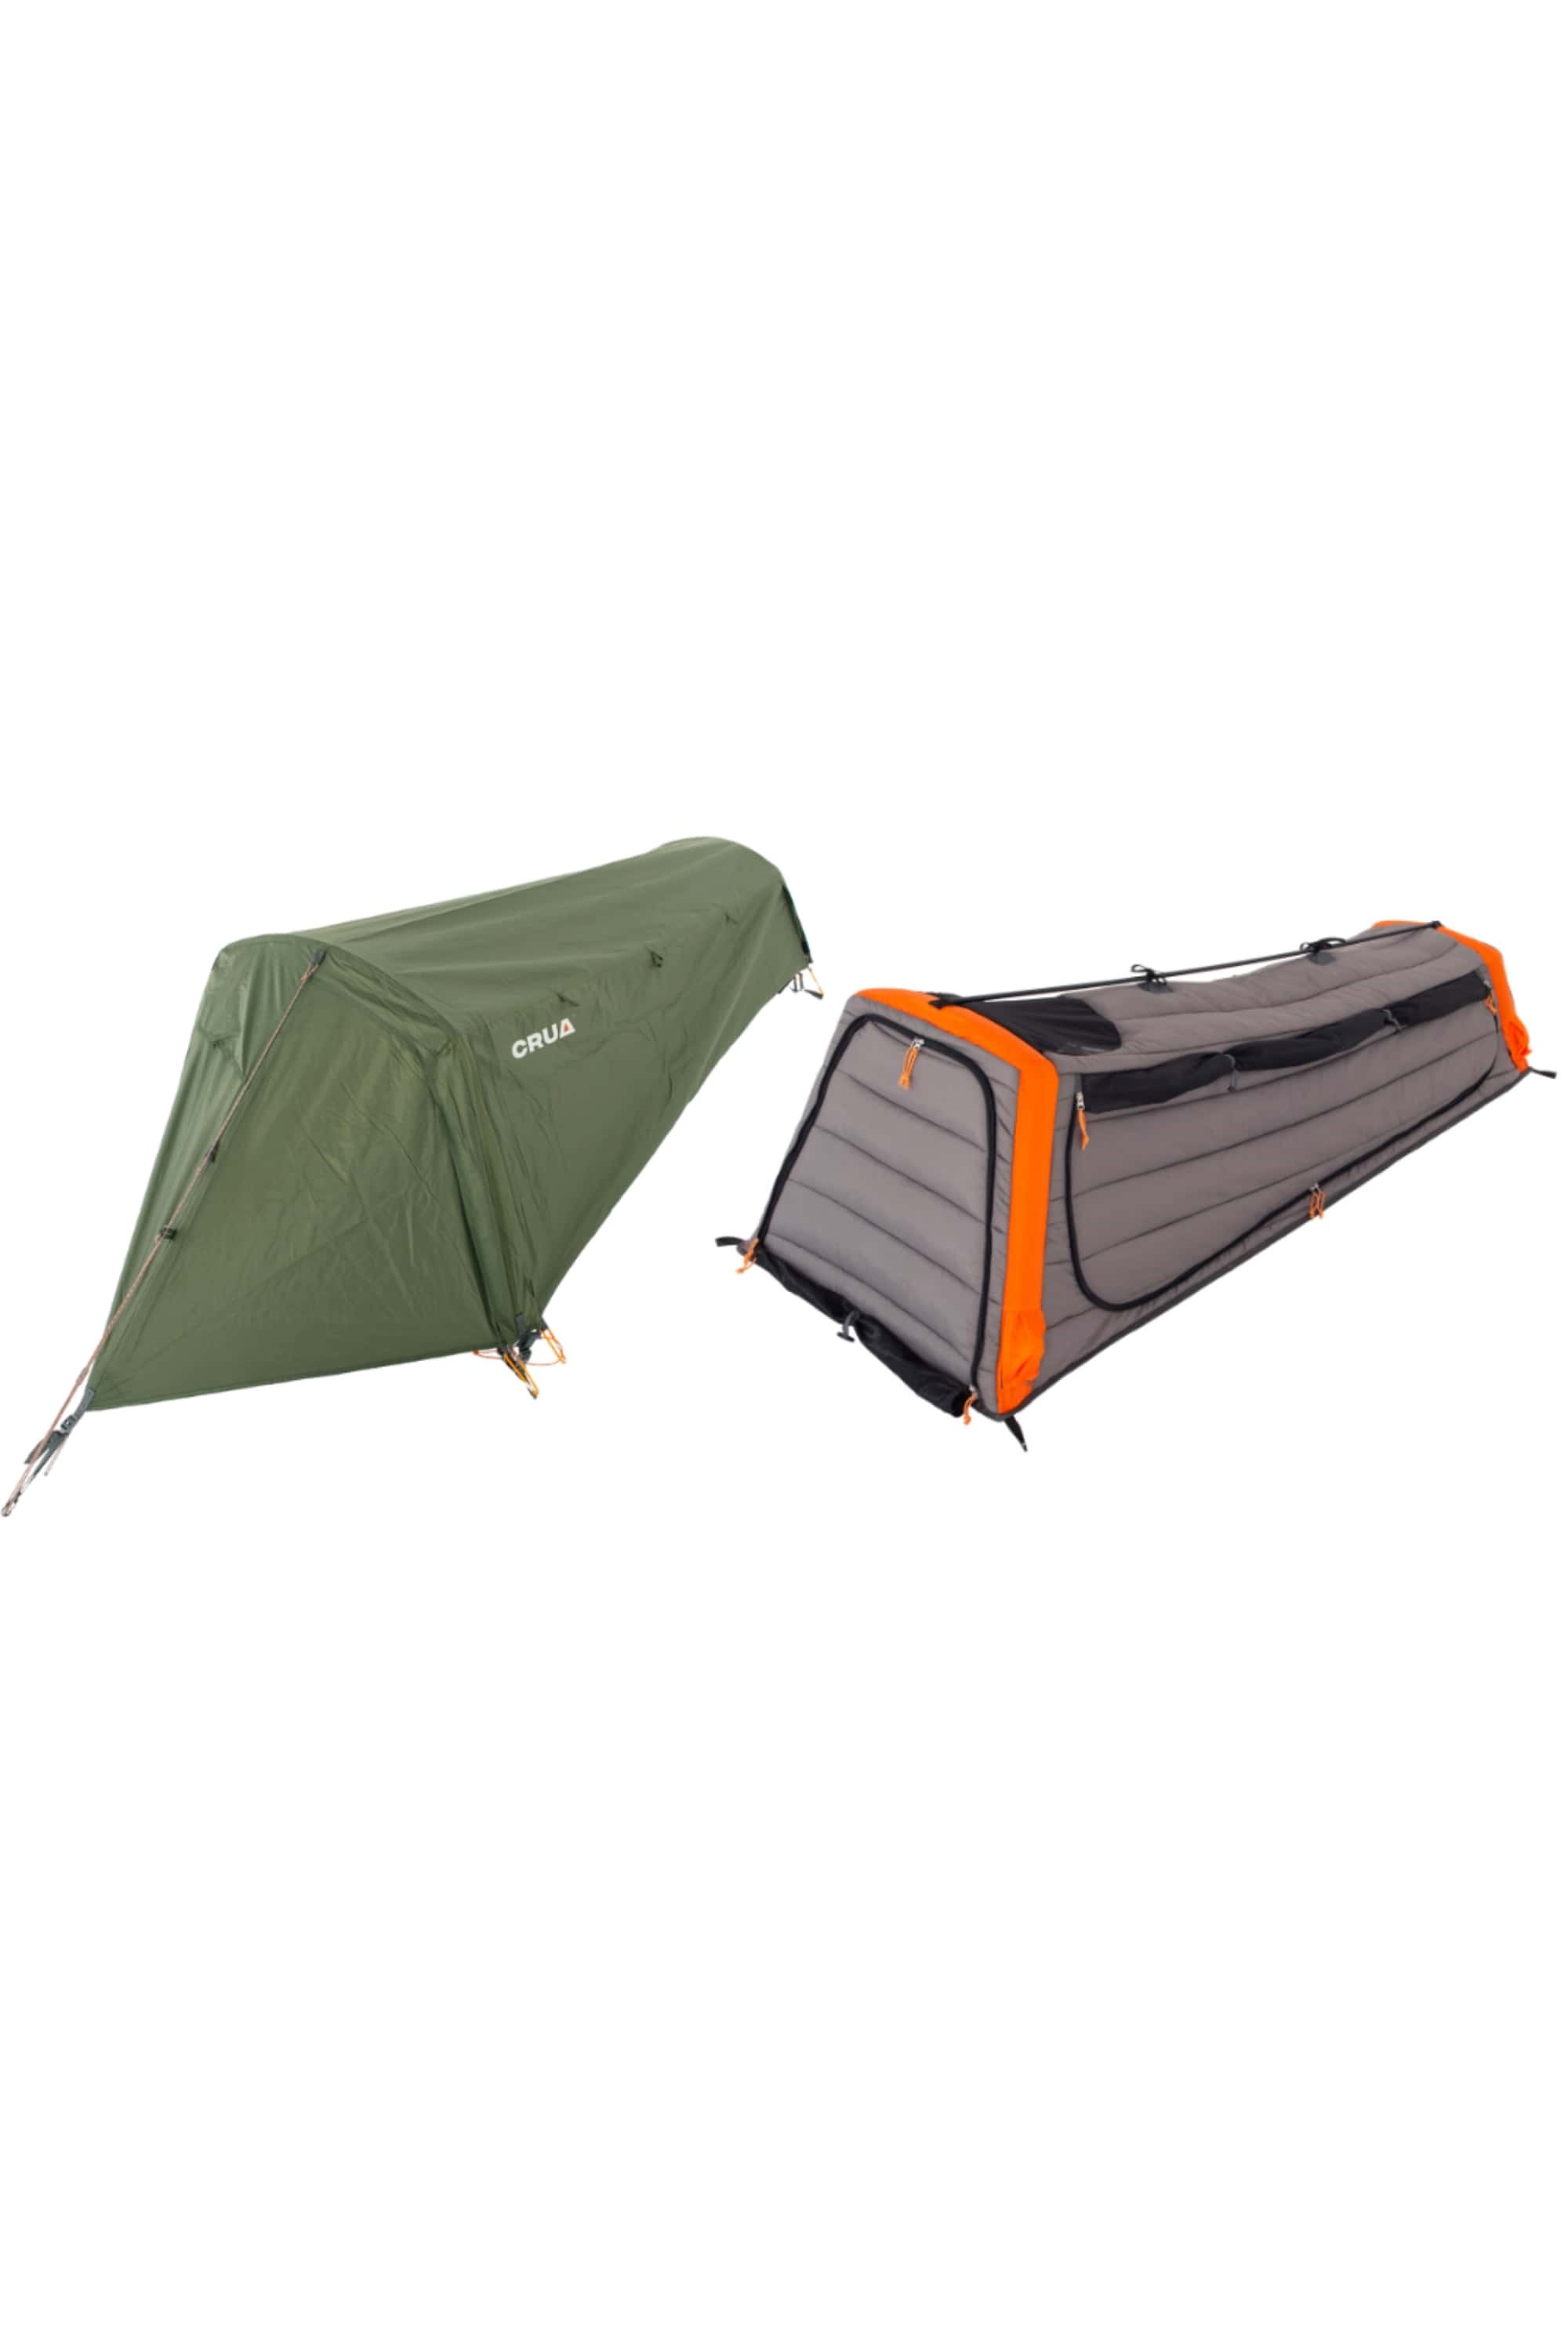 Hybrid Combo 1 Man Camping Insulated Tent Set -